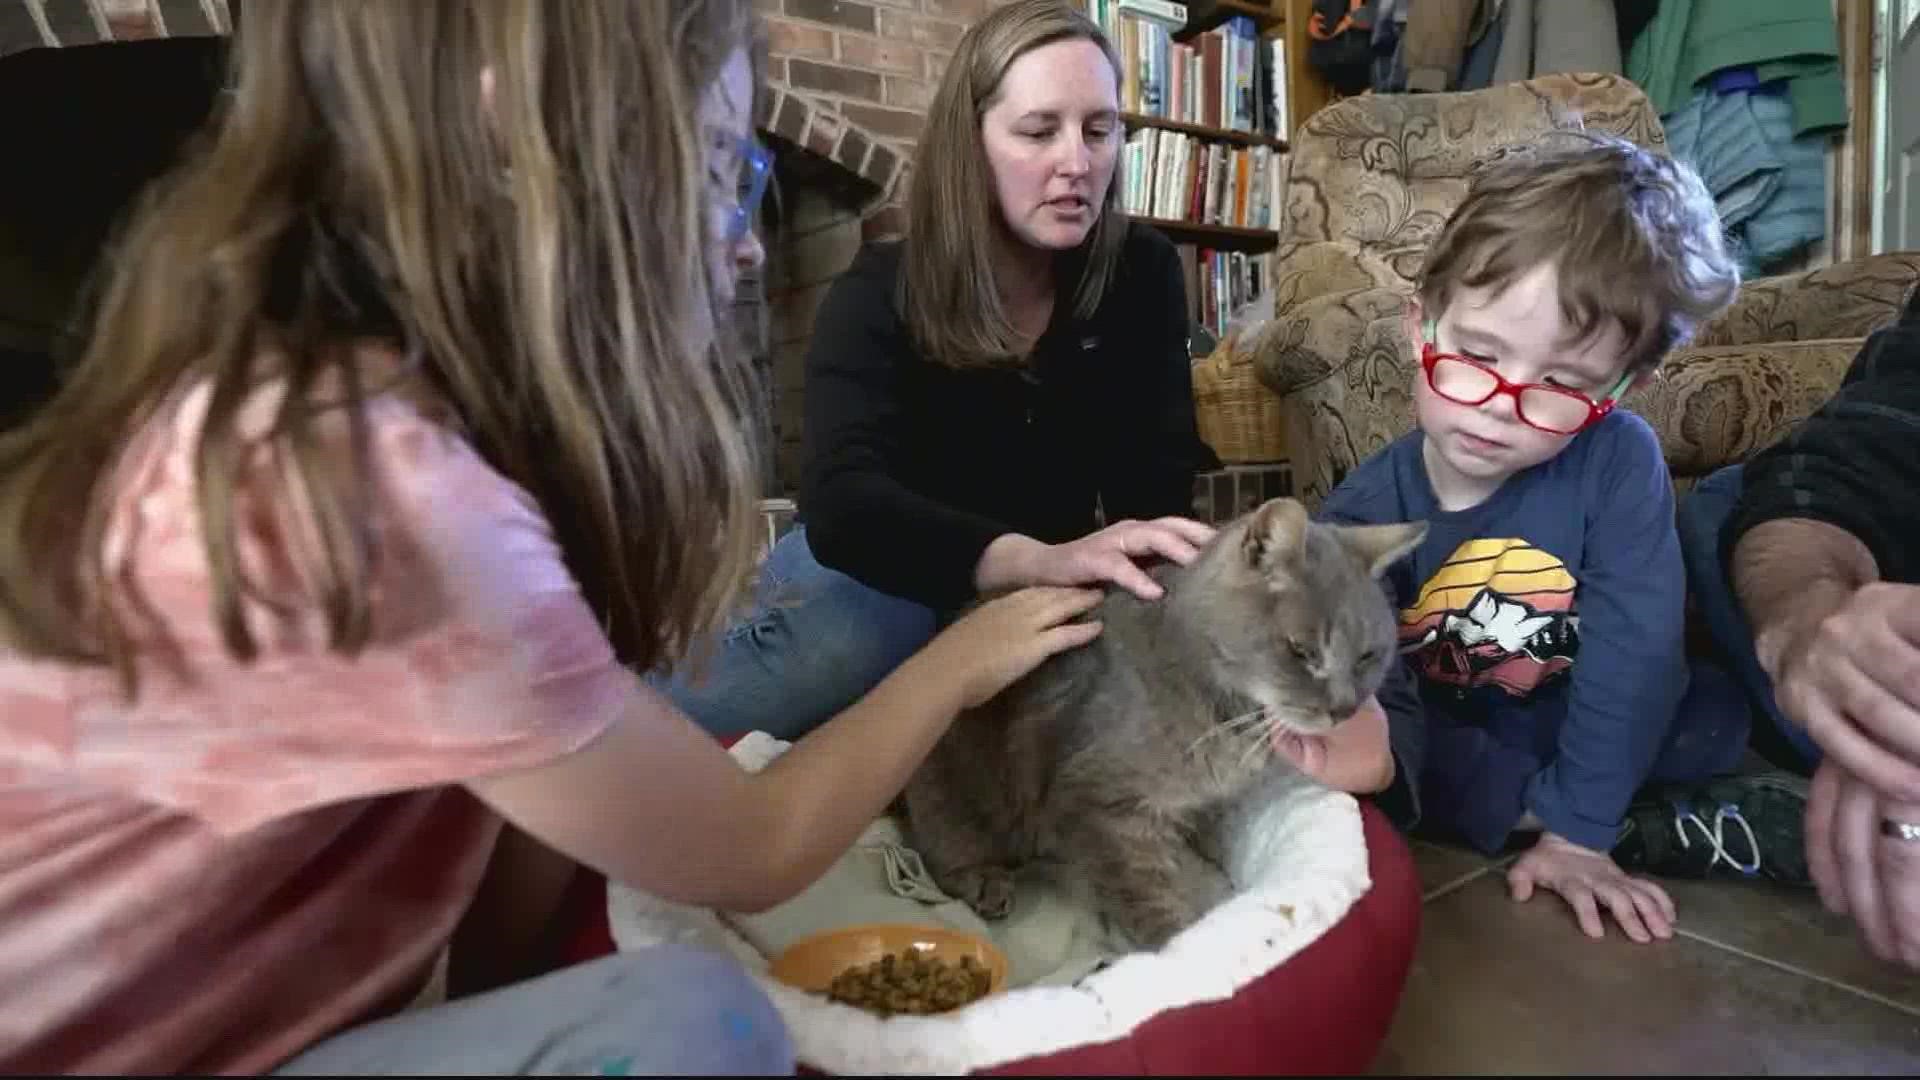 Ritz the cat was reunited with his pet parents, who all this time, kept his missing poster.